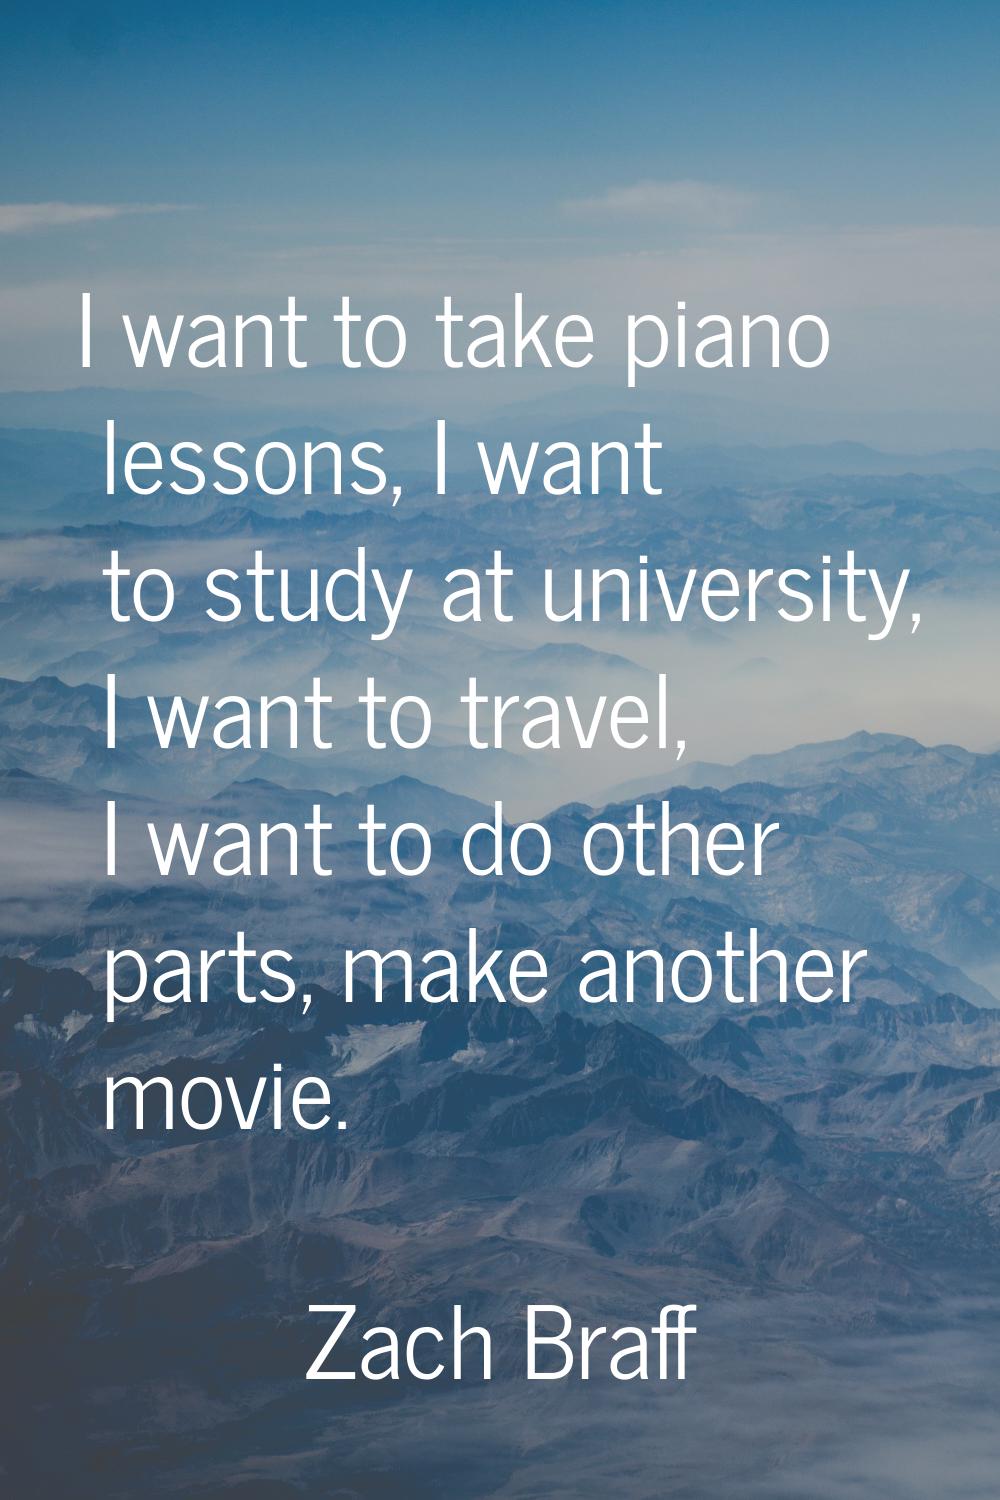 I want to take piano lessons, I want to study at university, I want to travel, I want to do other p